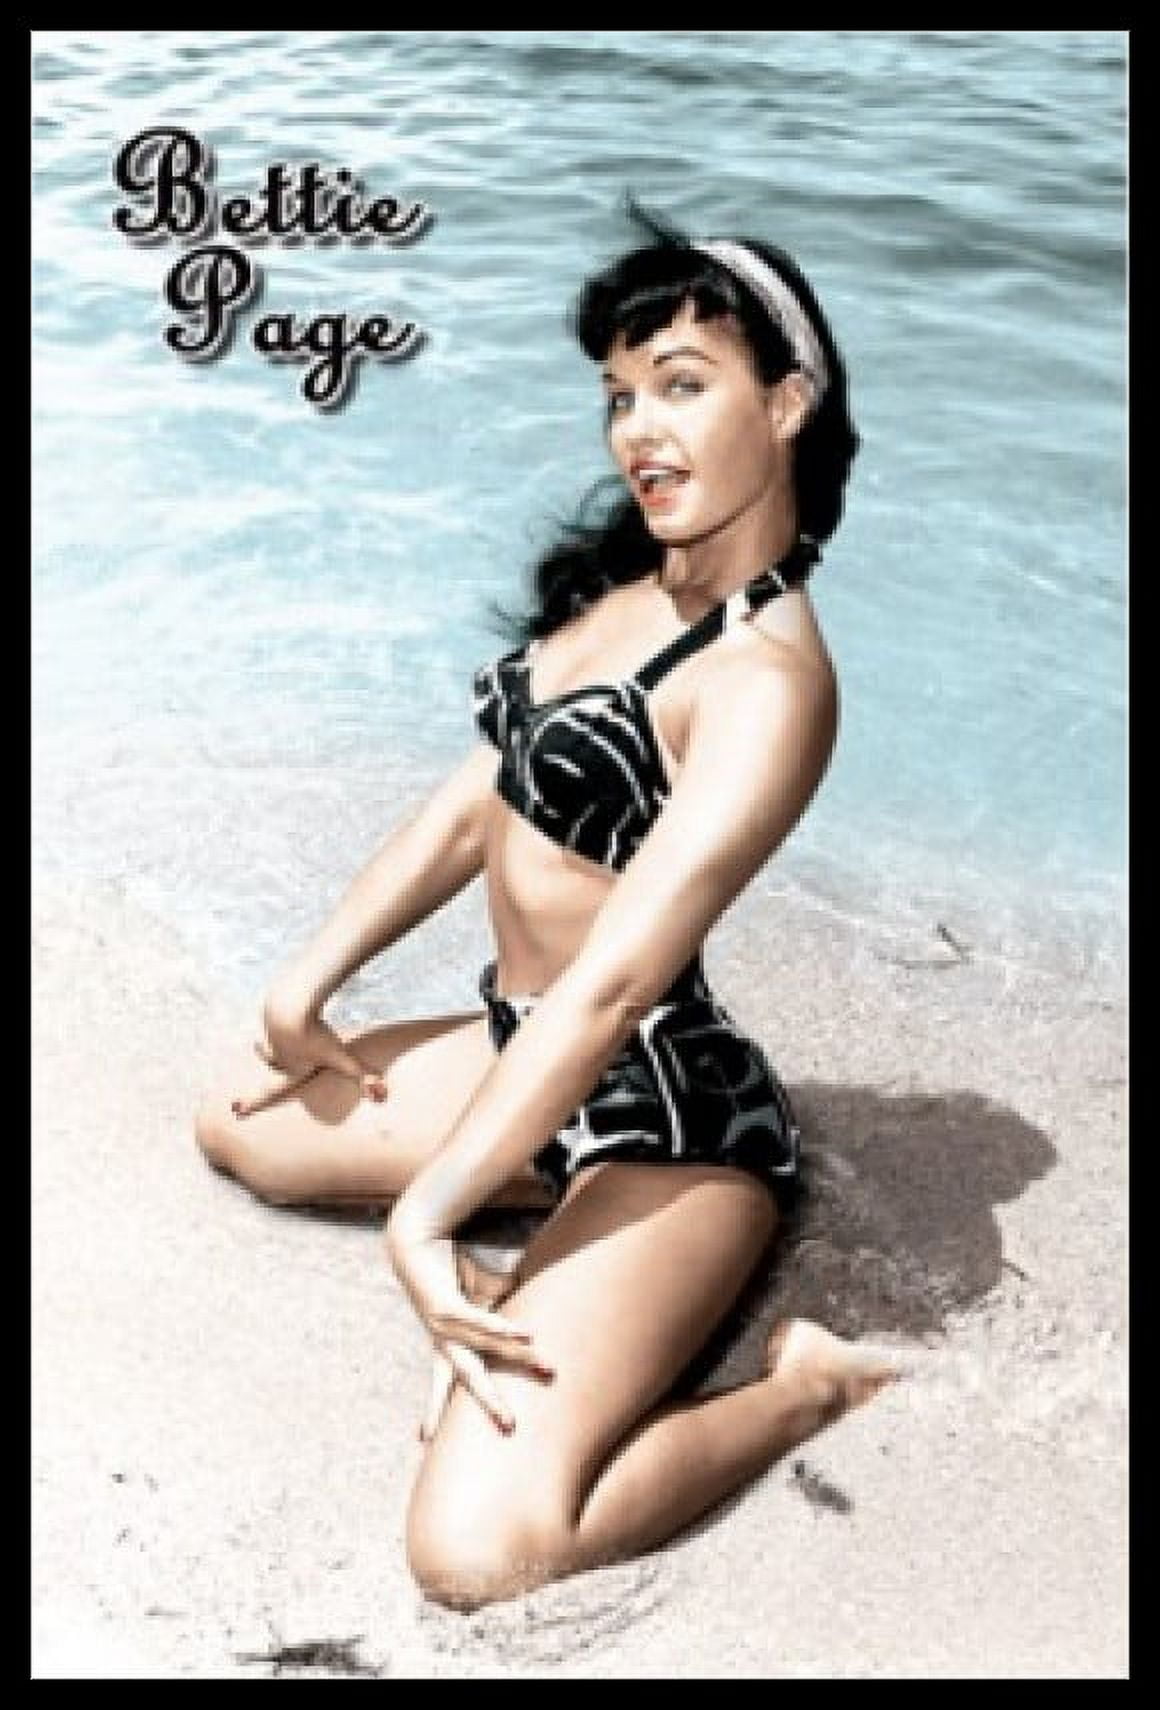 Bettie Page Sand Poster (24 X 36) 